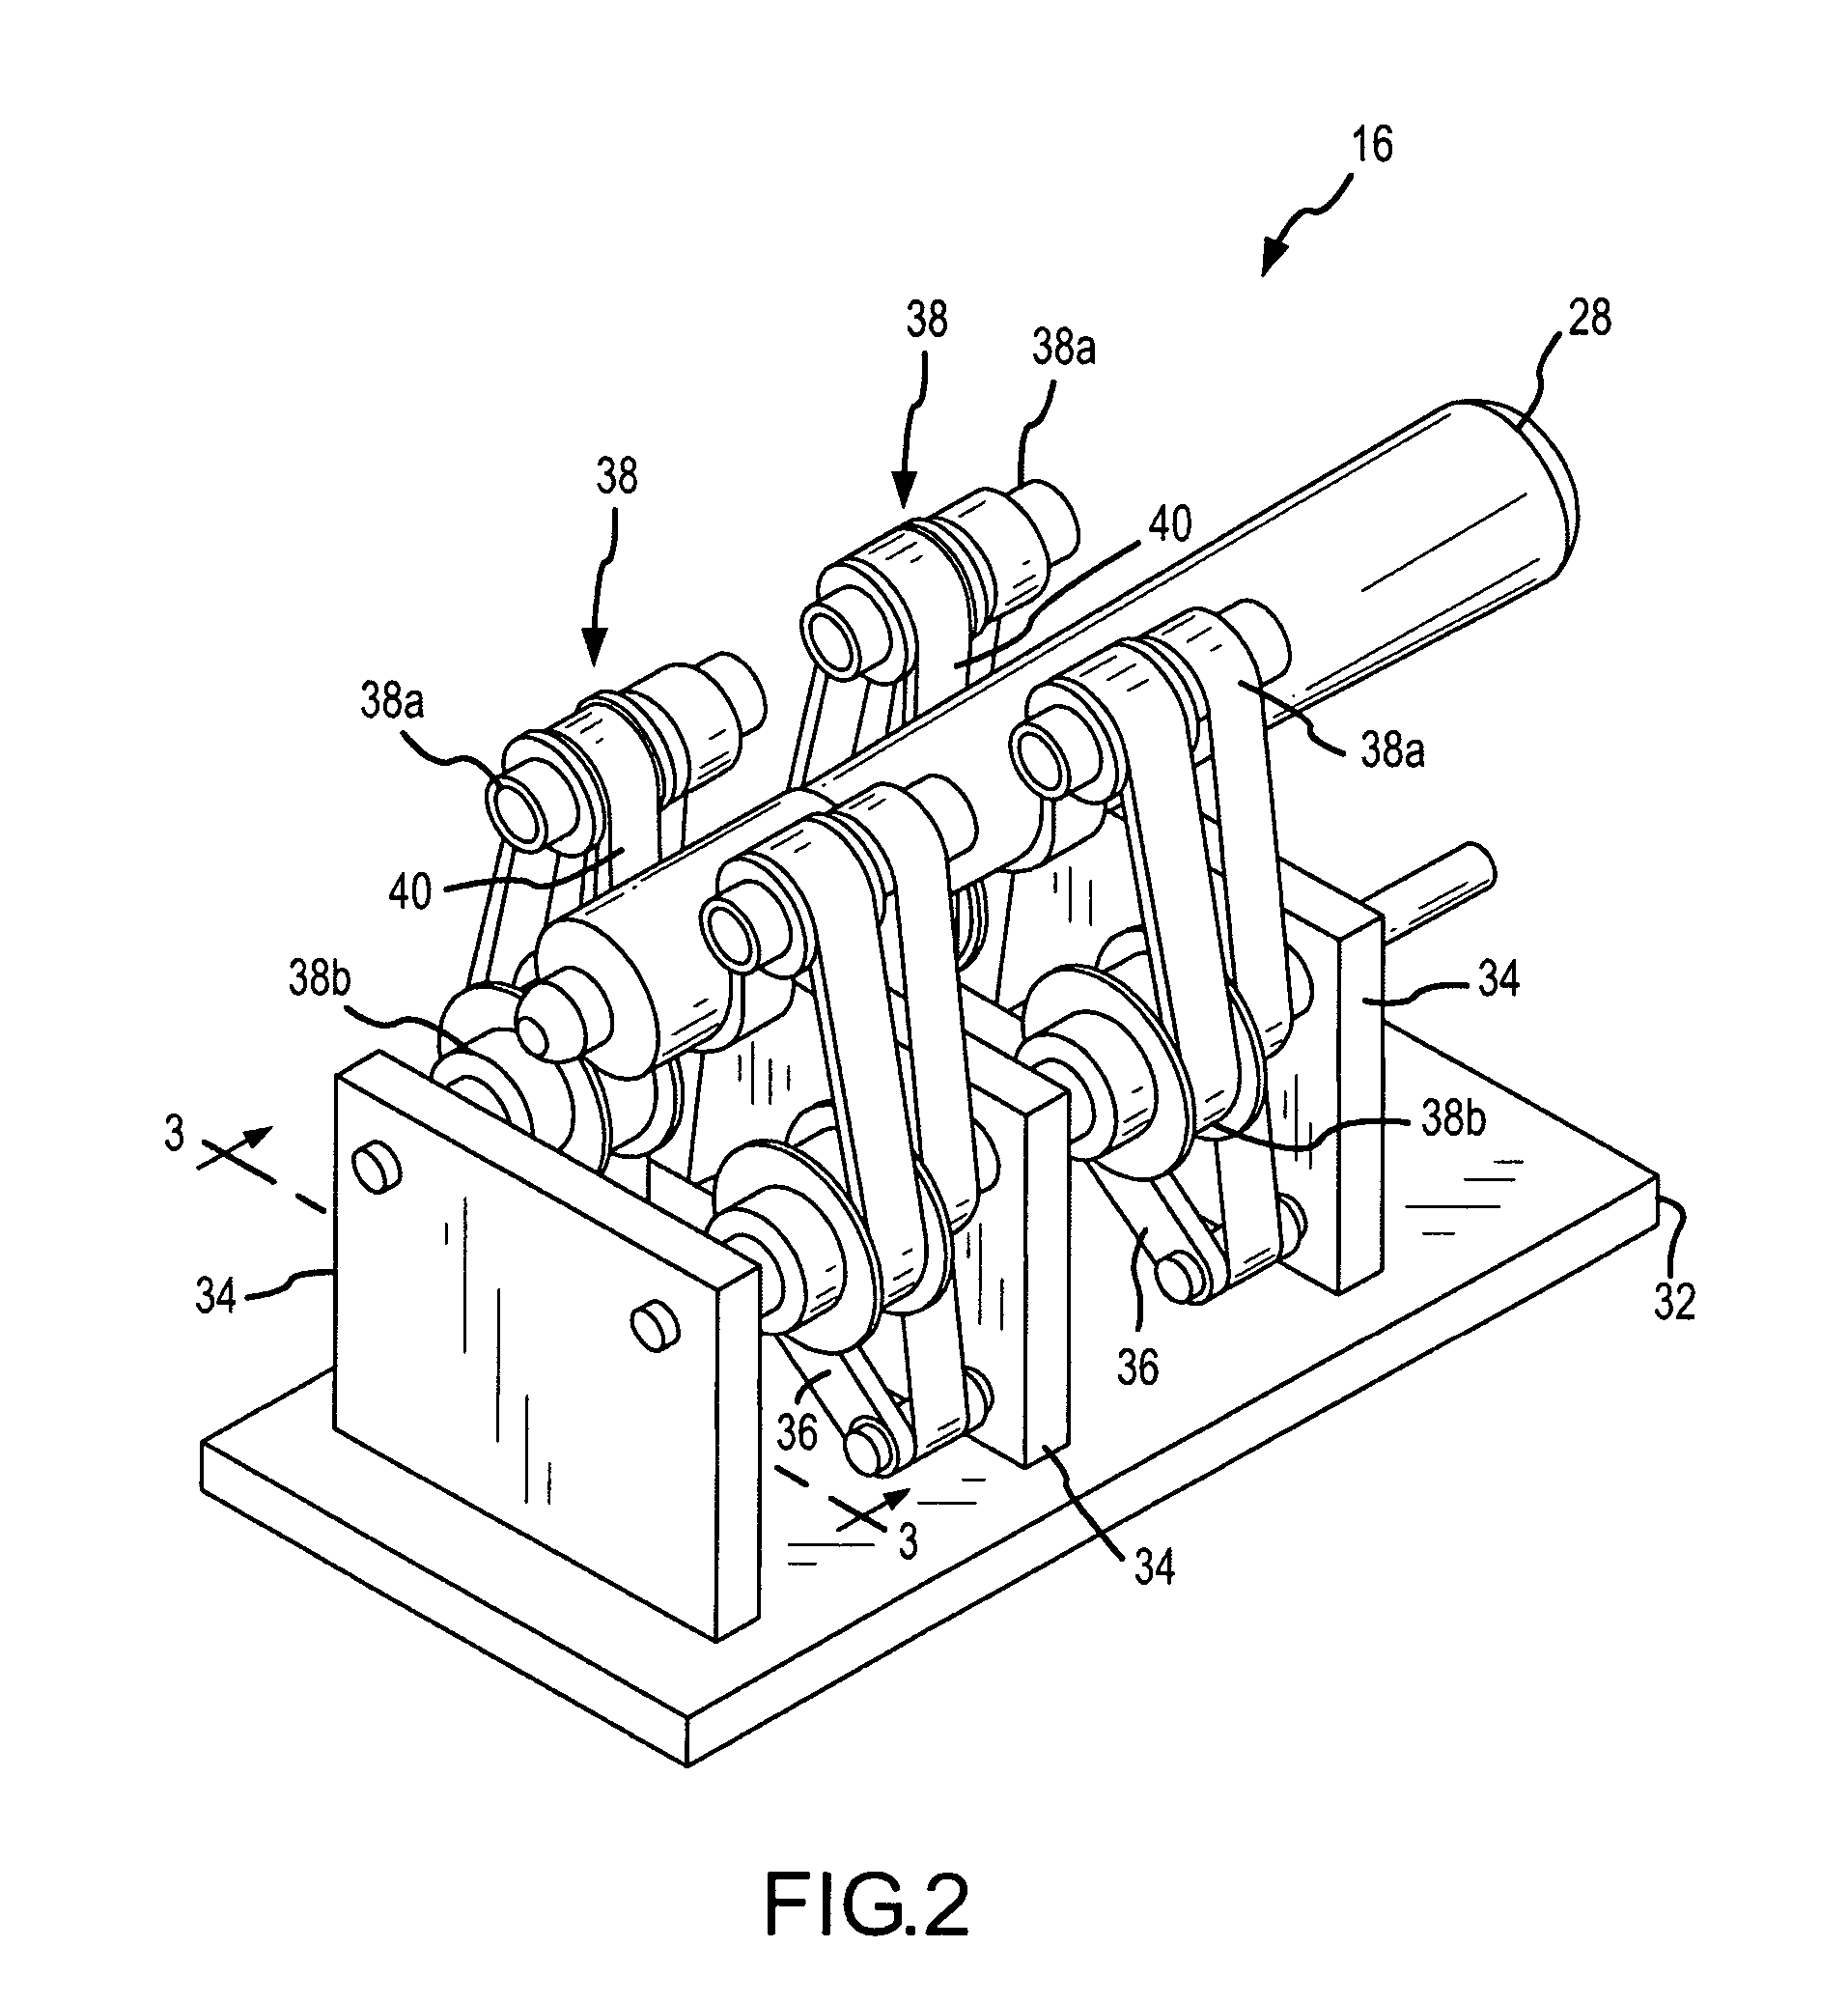 Robotic surgical system and method for automated creation of ablation lesions